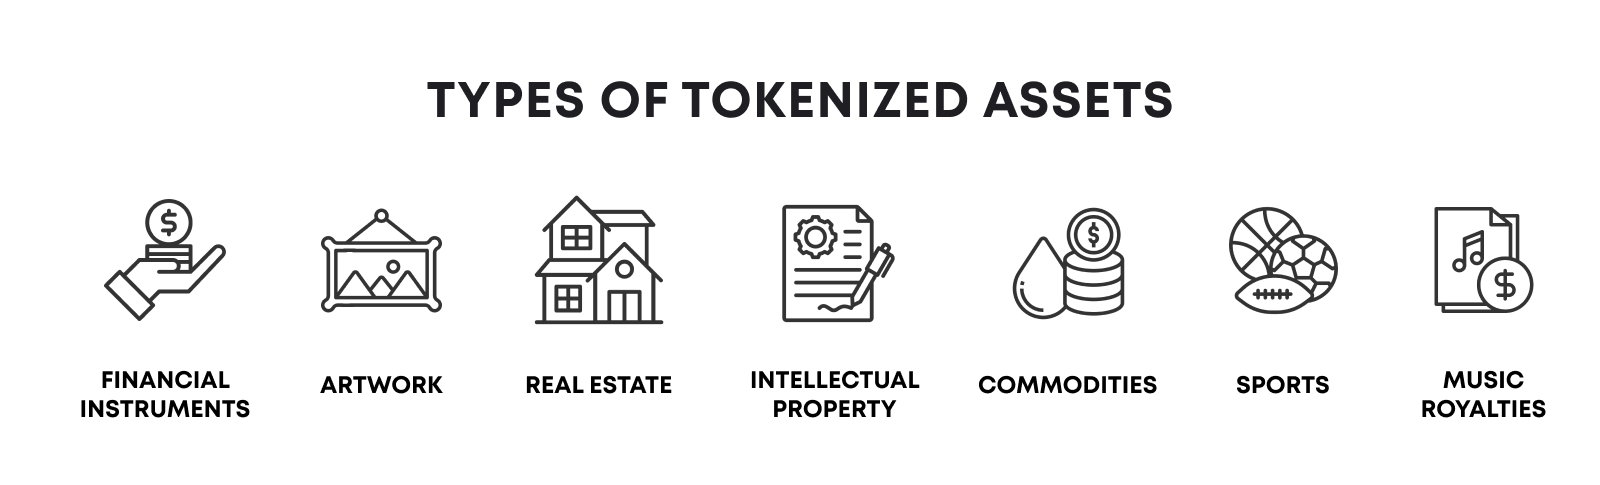 Tokenization is not limited to one sector; it spans real estate, funds, artwork, commodities, intellectual property, sports teams, music royalties, and other less obvious spheres.